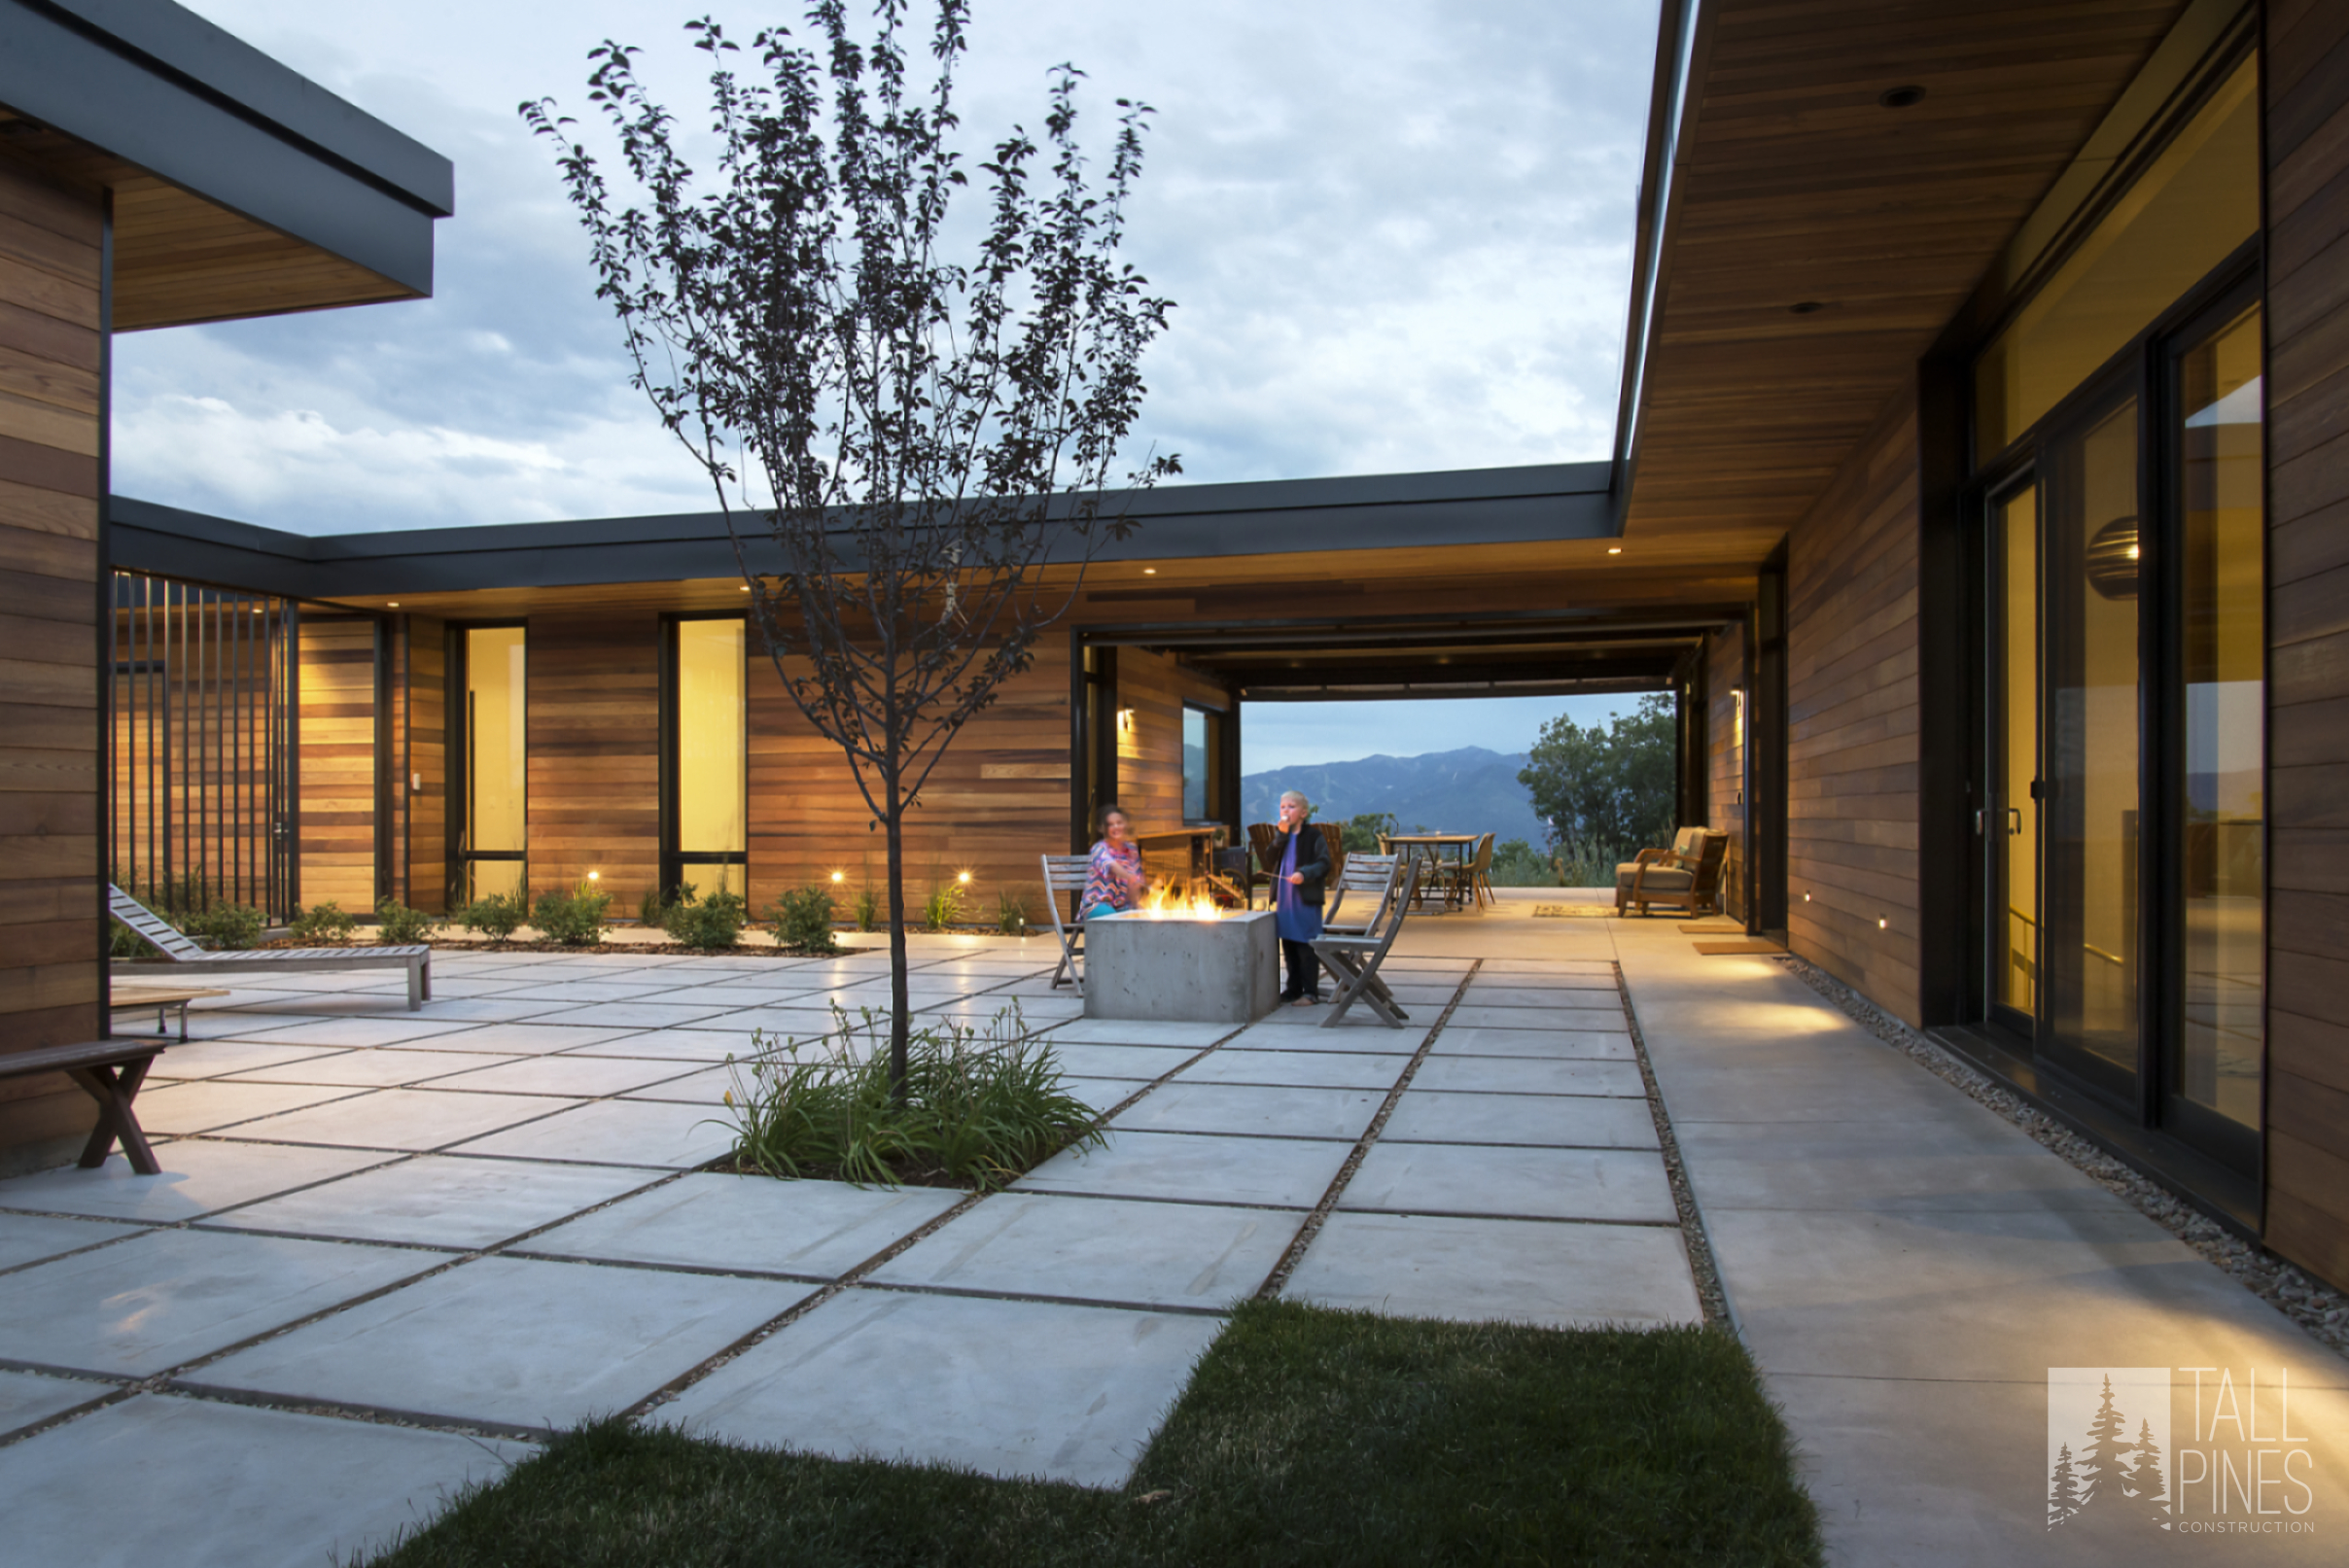 Redhawk House's contemporary exterior design harmonizing with nature